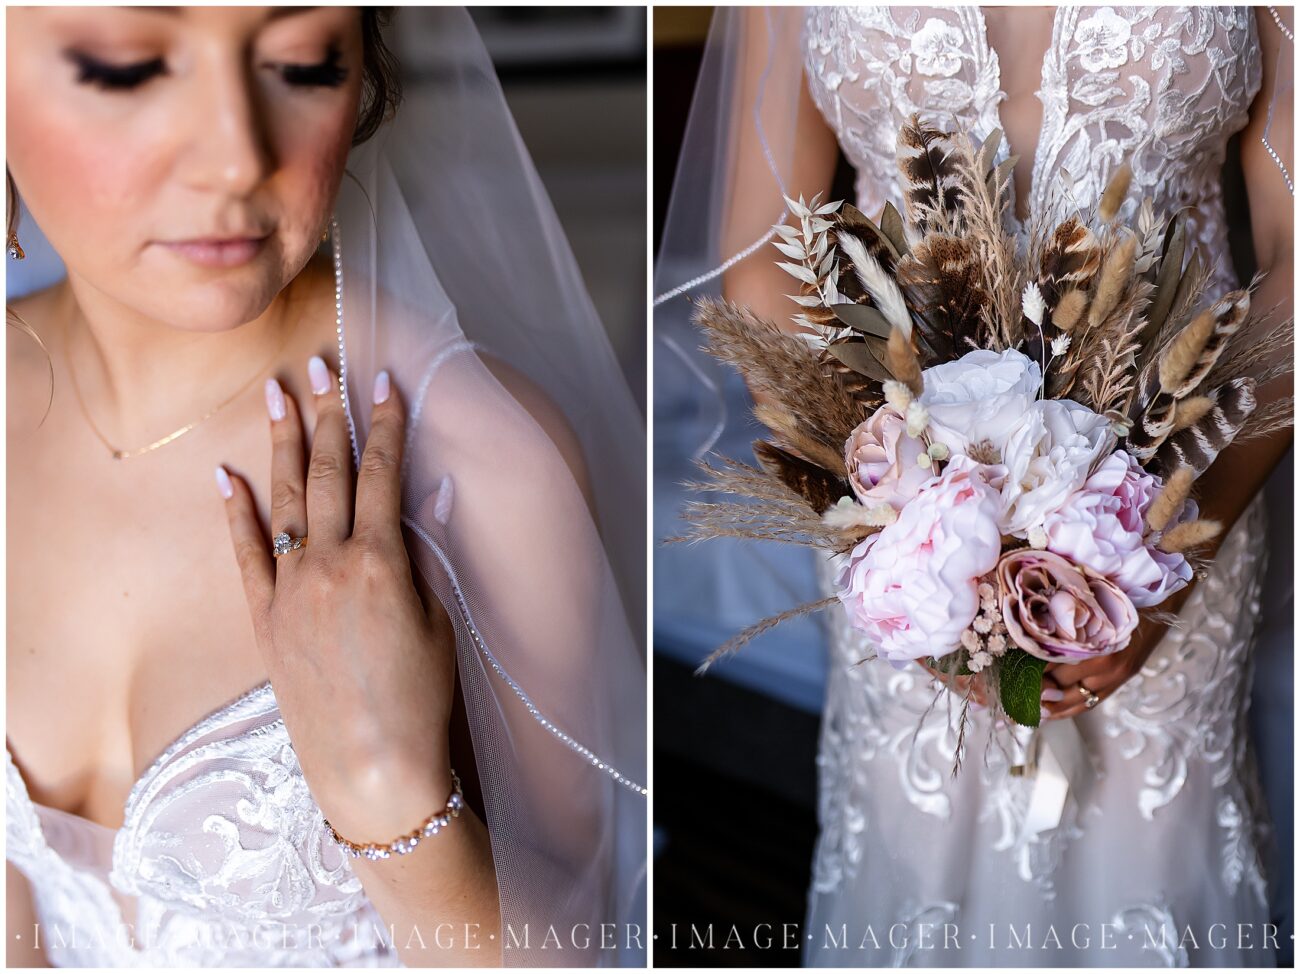 A small town wedding photo collage of the bride showing off her ring and veil and her bouquet. Her bouquet has feather detail from a turkey she shot.

L'erable, IL. Photo taken by Mager Image Photography.